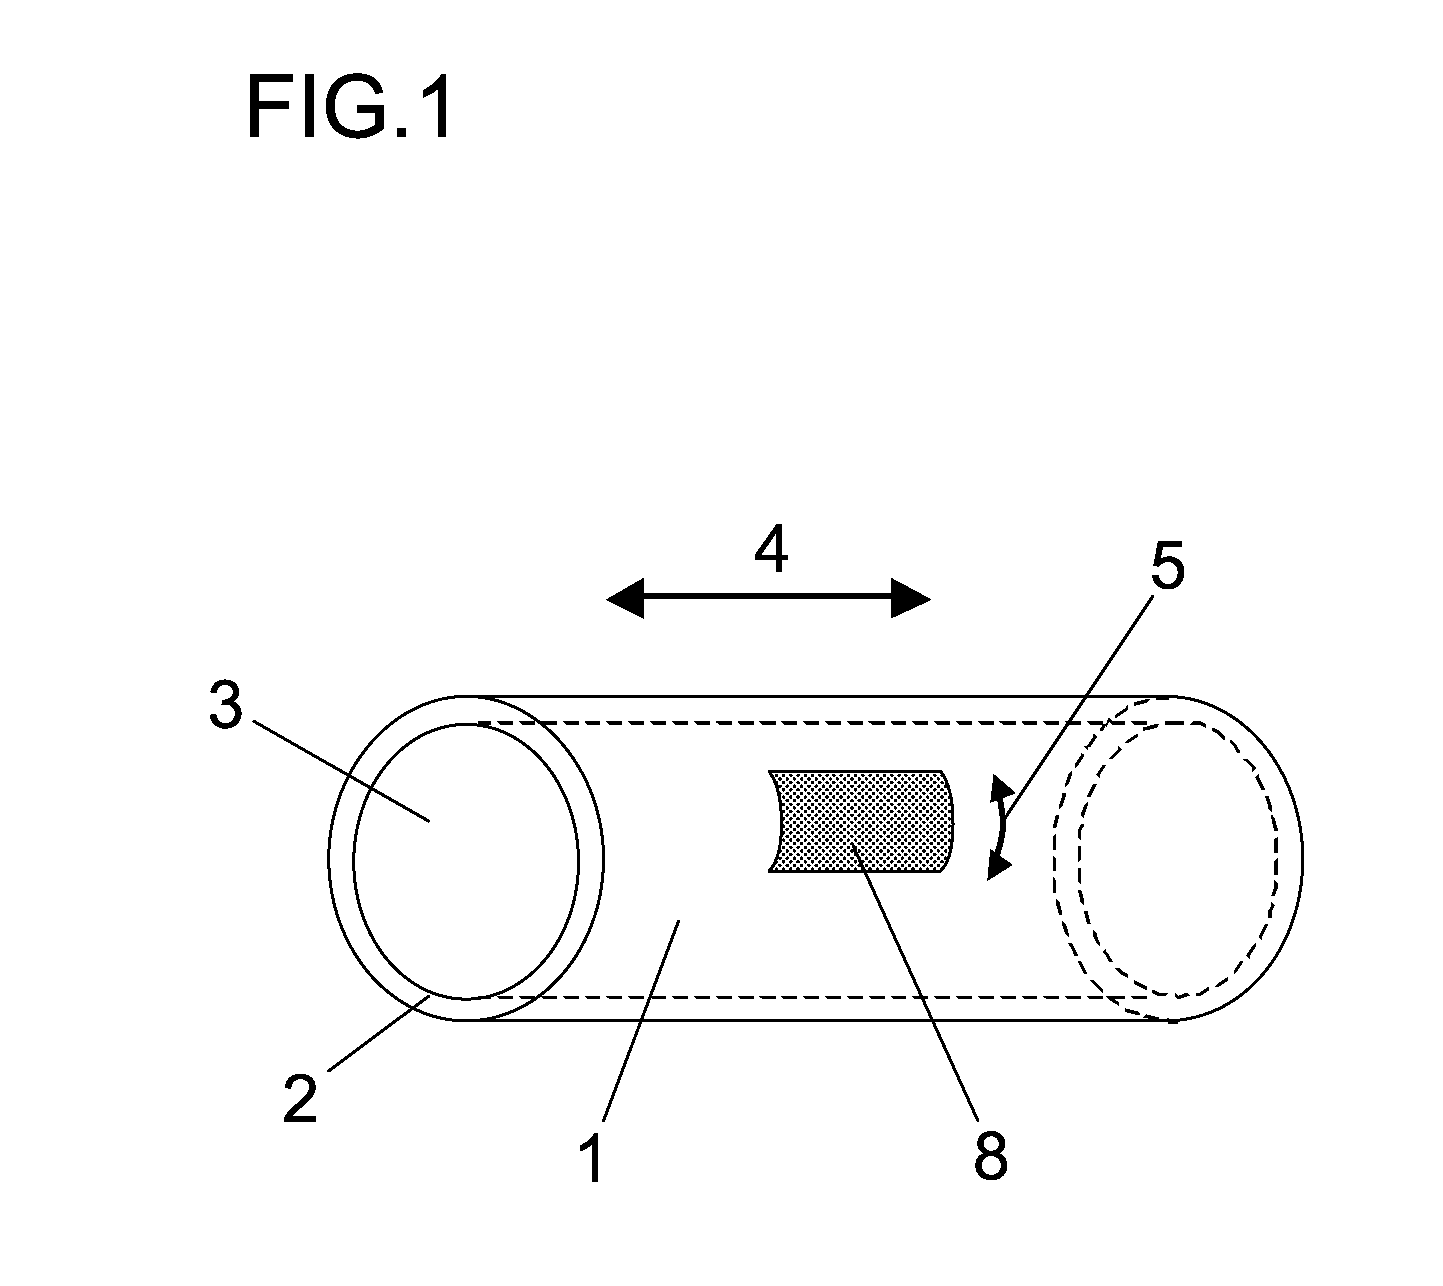 Bonding wire for semiconductor device